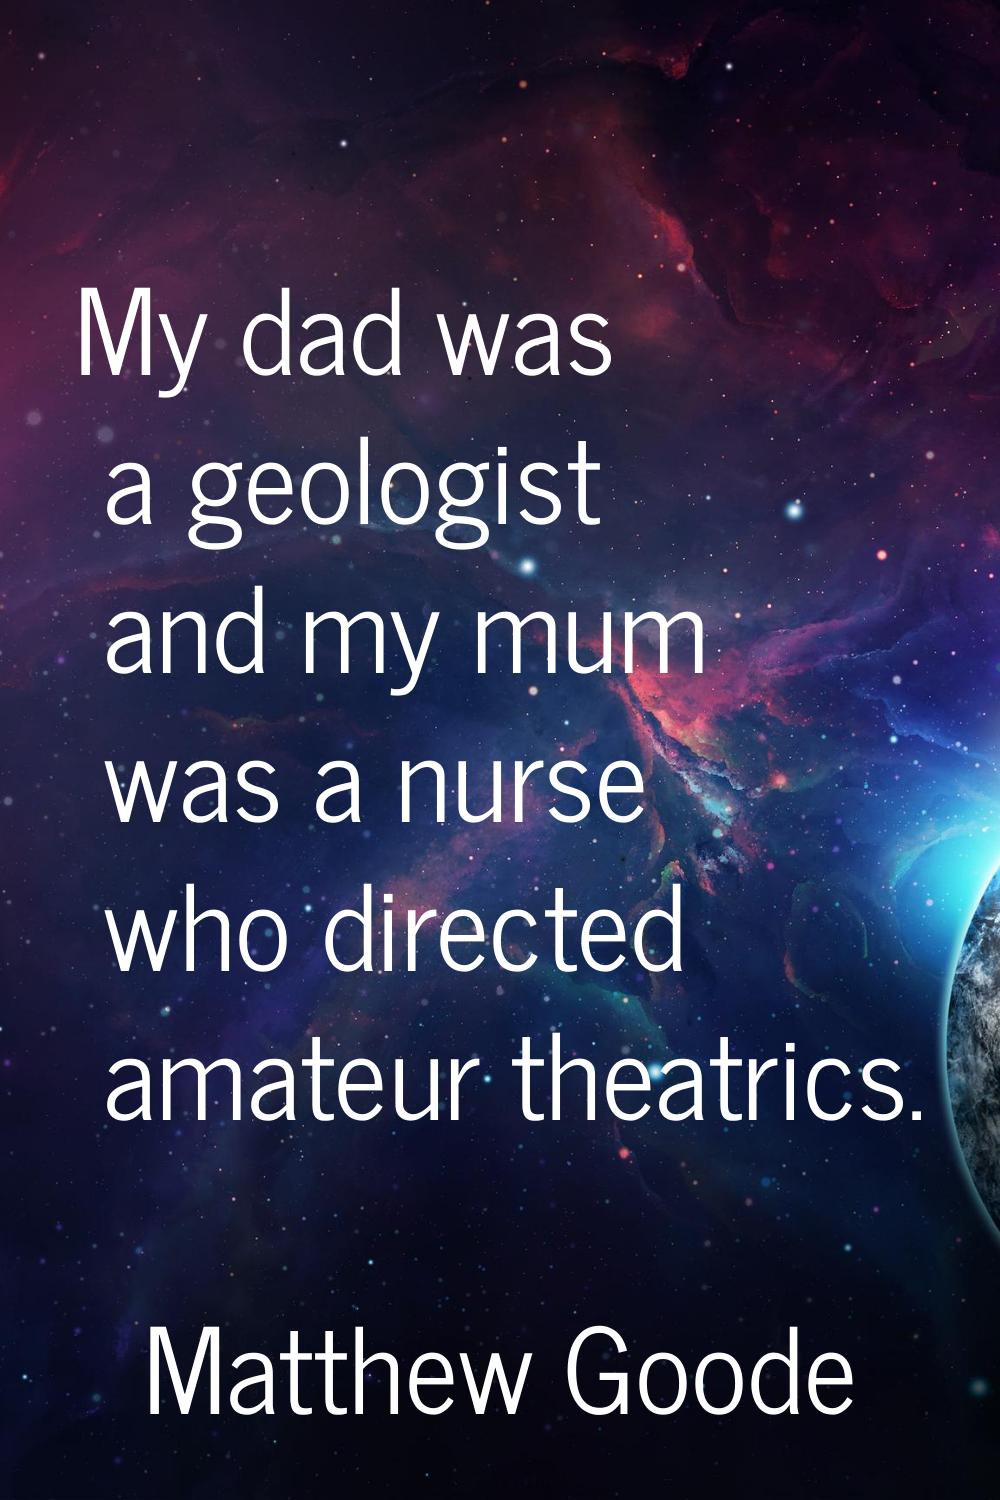 My dad was a geologist and my mum was a nurse who directed amateur theatrics.